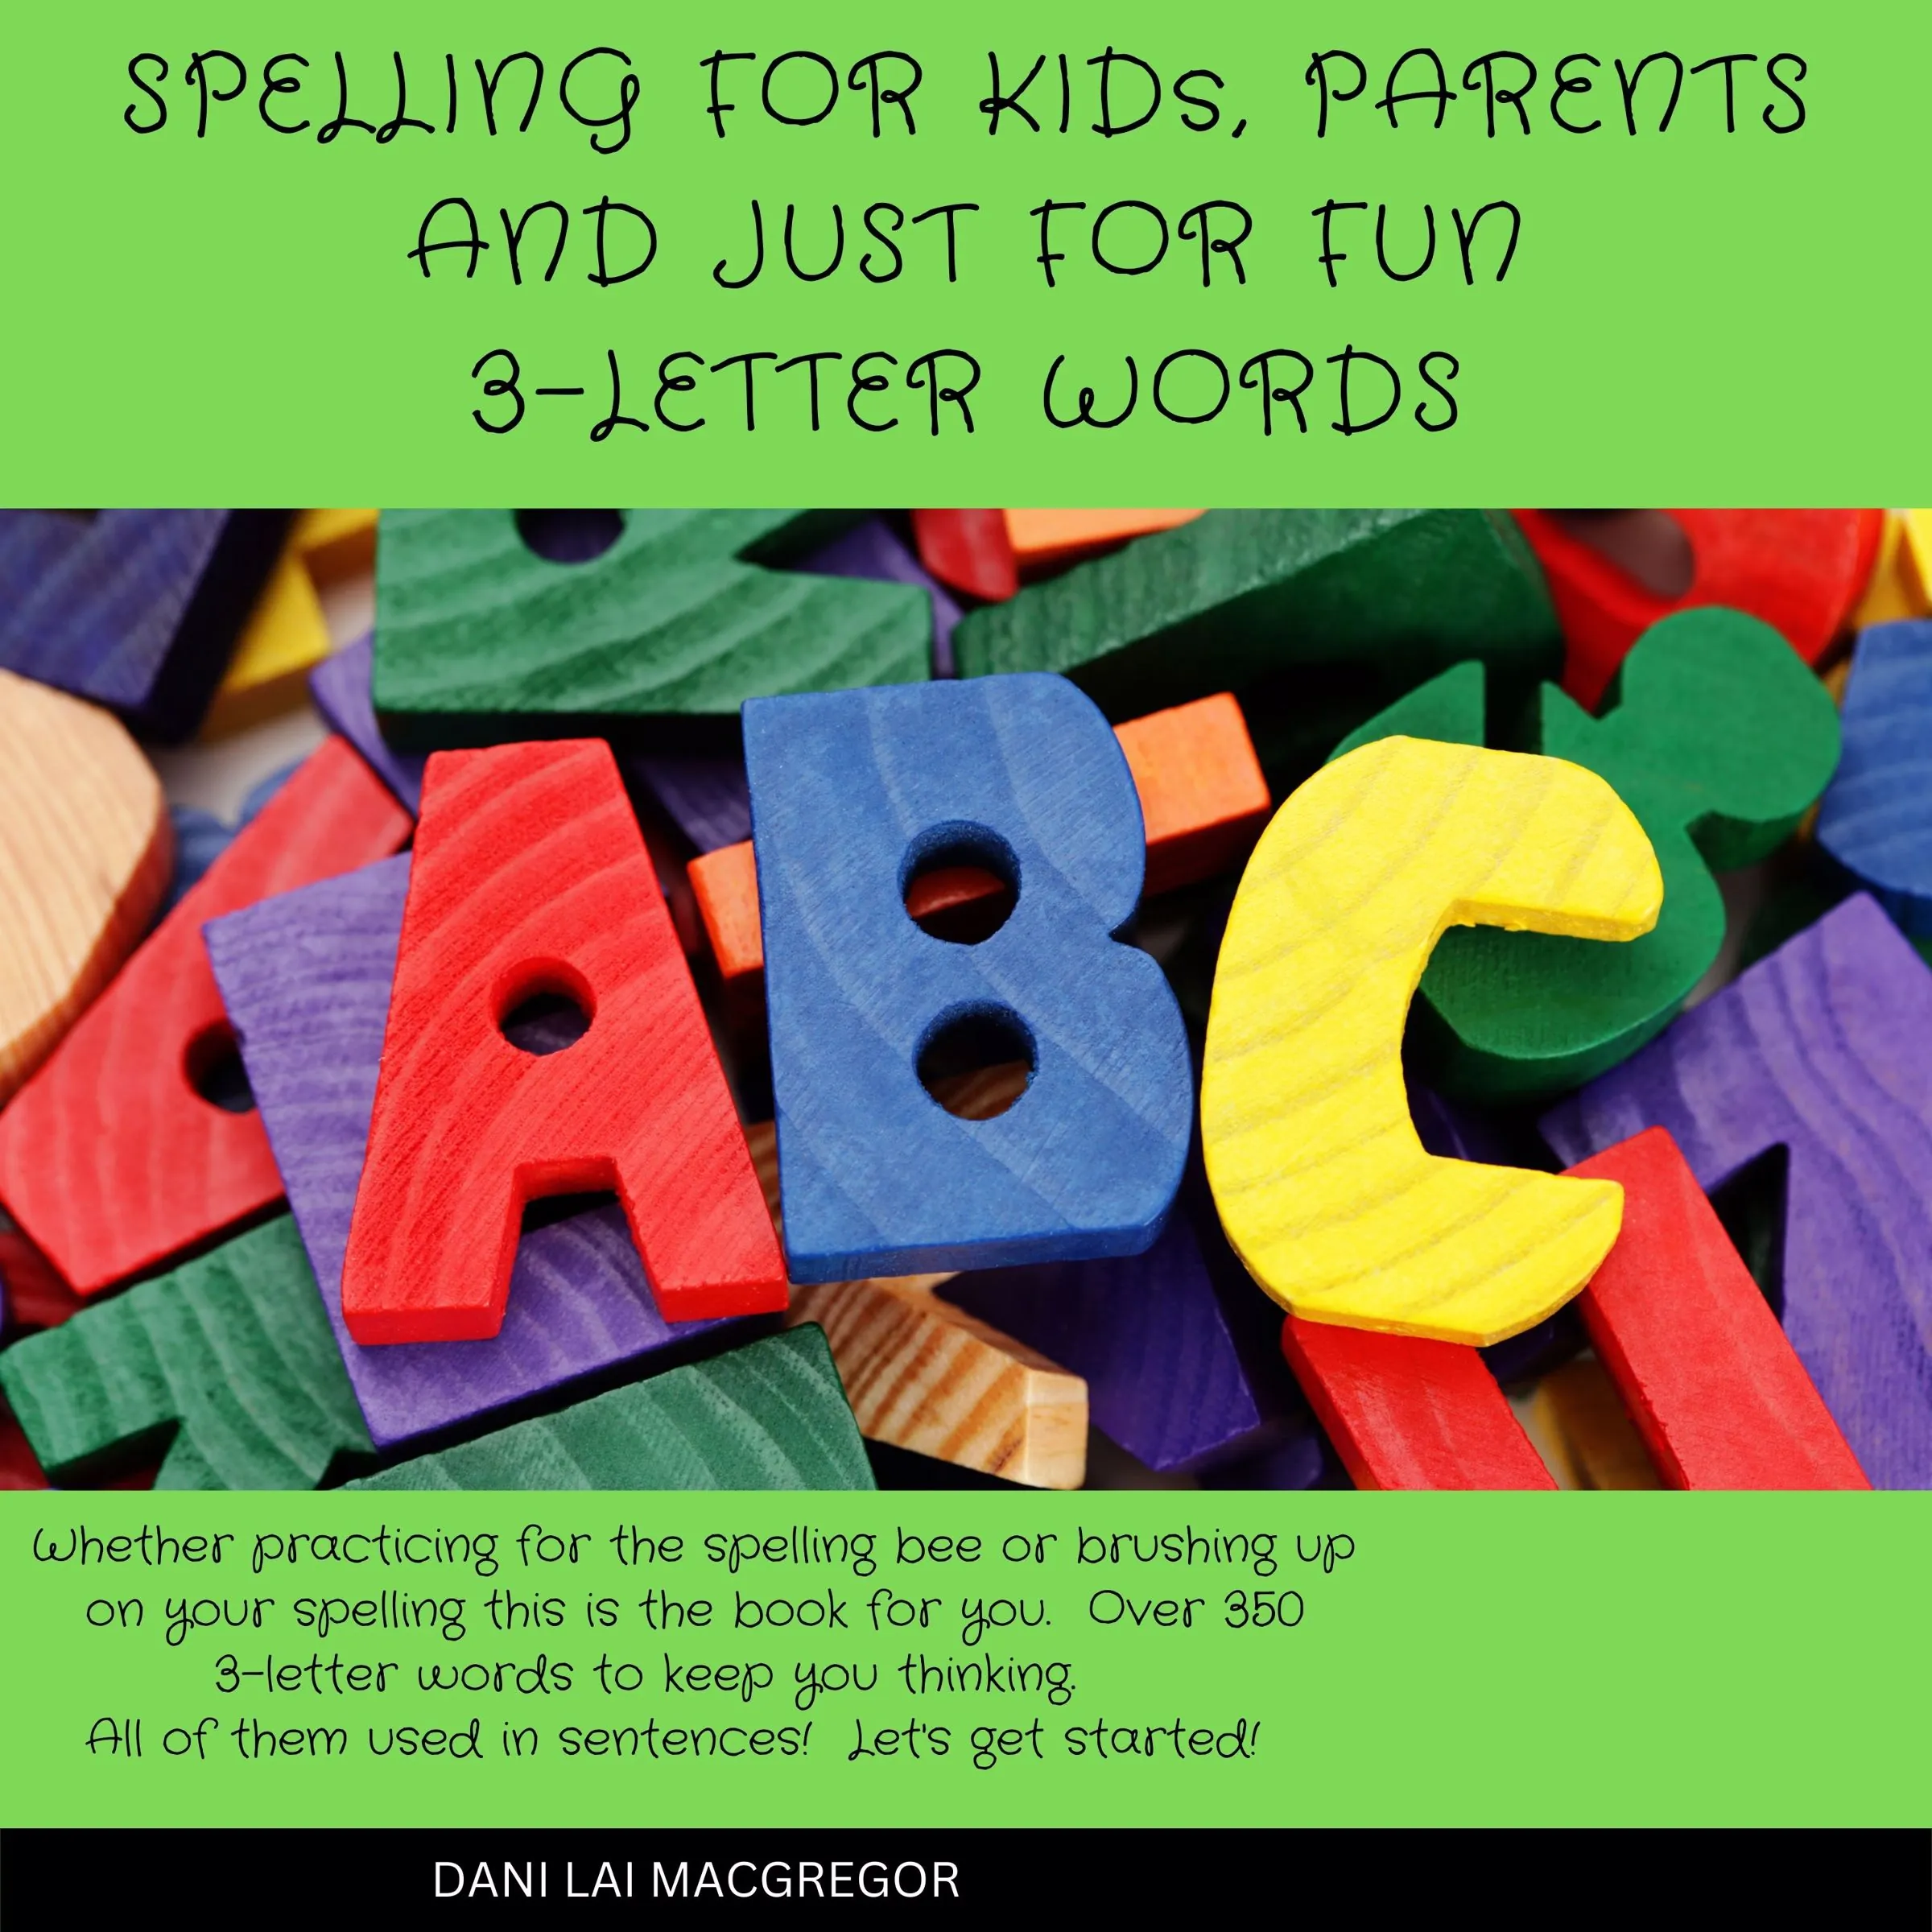 Spelling for Kids, Parents and Just for Fun - 3 Letter Words Audiobook by Dani Lai MacGregor